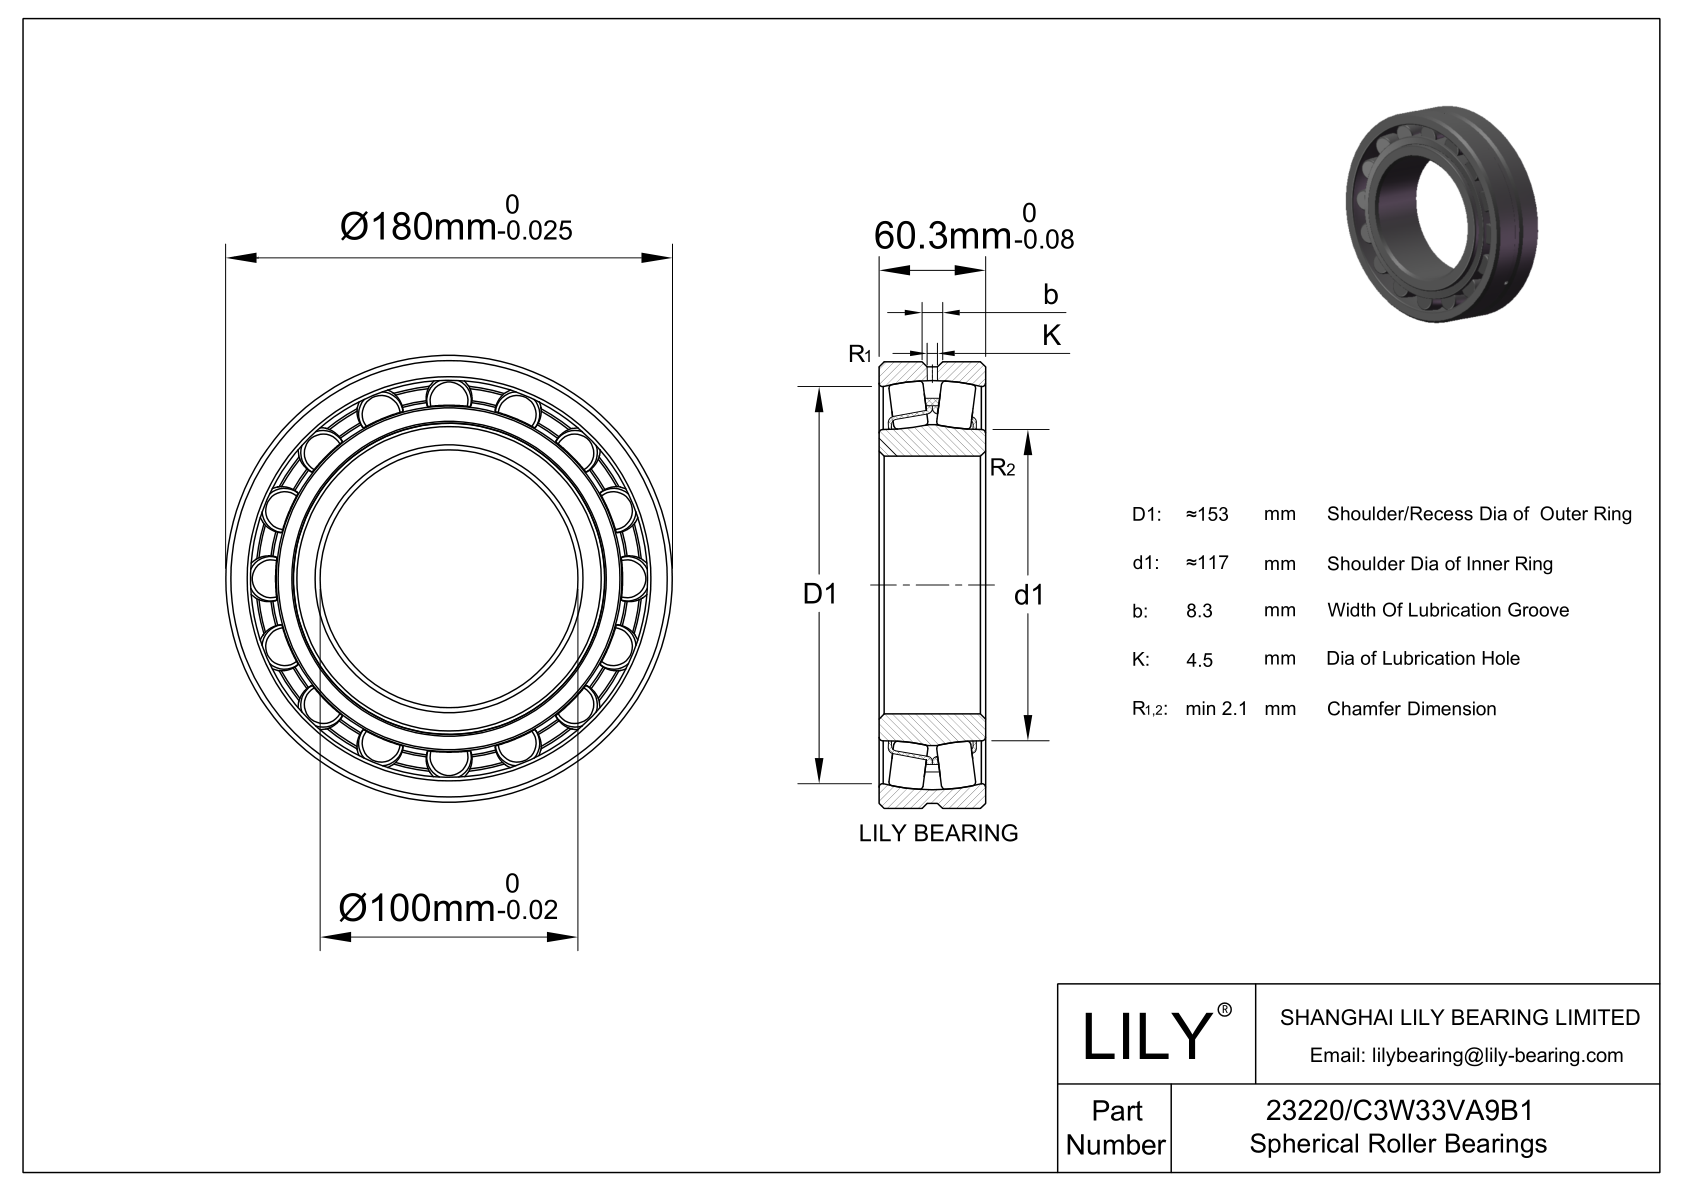 23220/C3W33VA9B1 Double Row Spherical Roller Bearing cad drawing